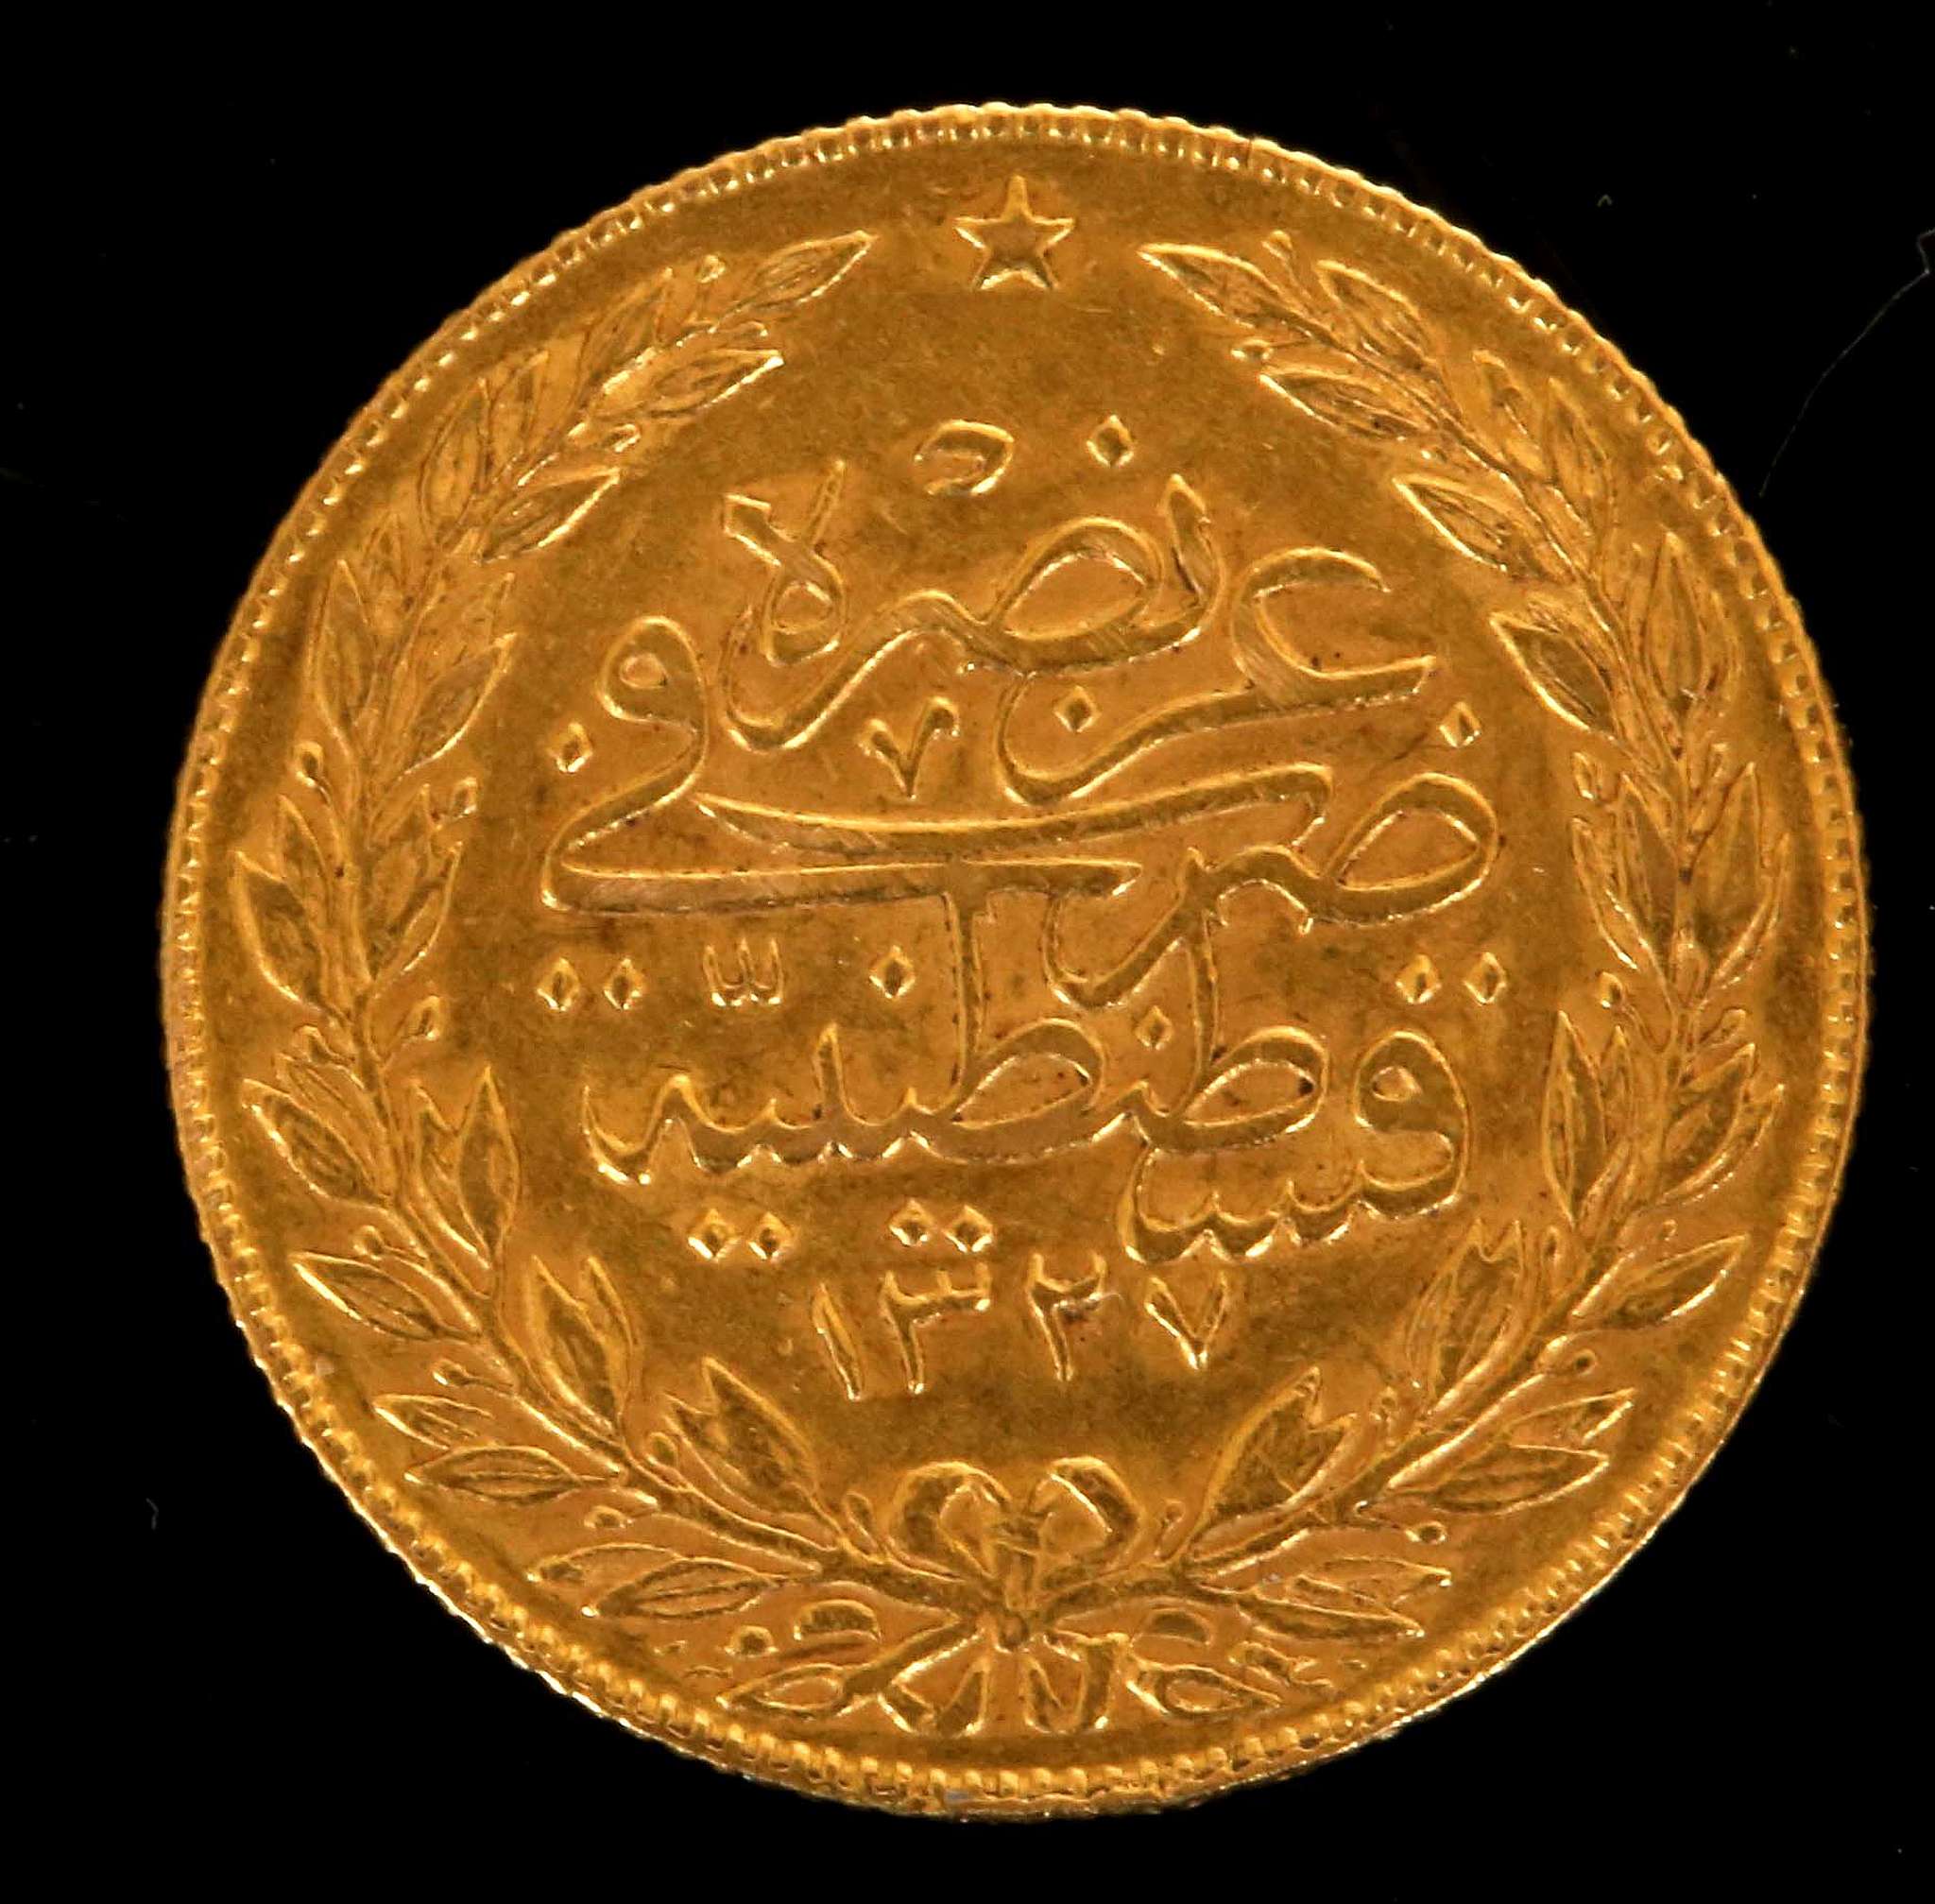 Turkey, a gold 100 Kurus coin 1867-70, obverse El-Ghazt at right of Toughra, reverse script within - Image 2 of 2